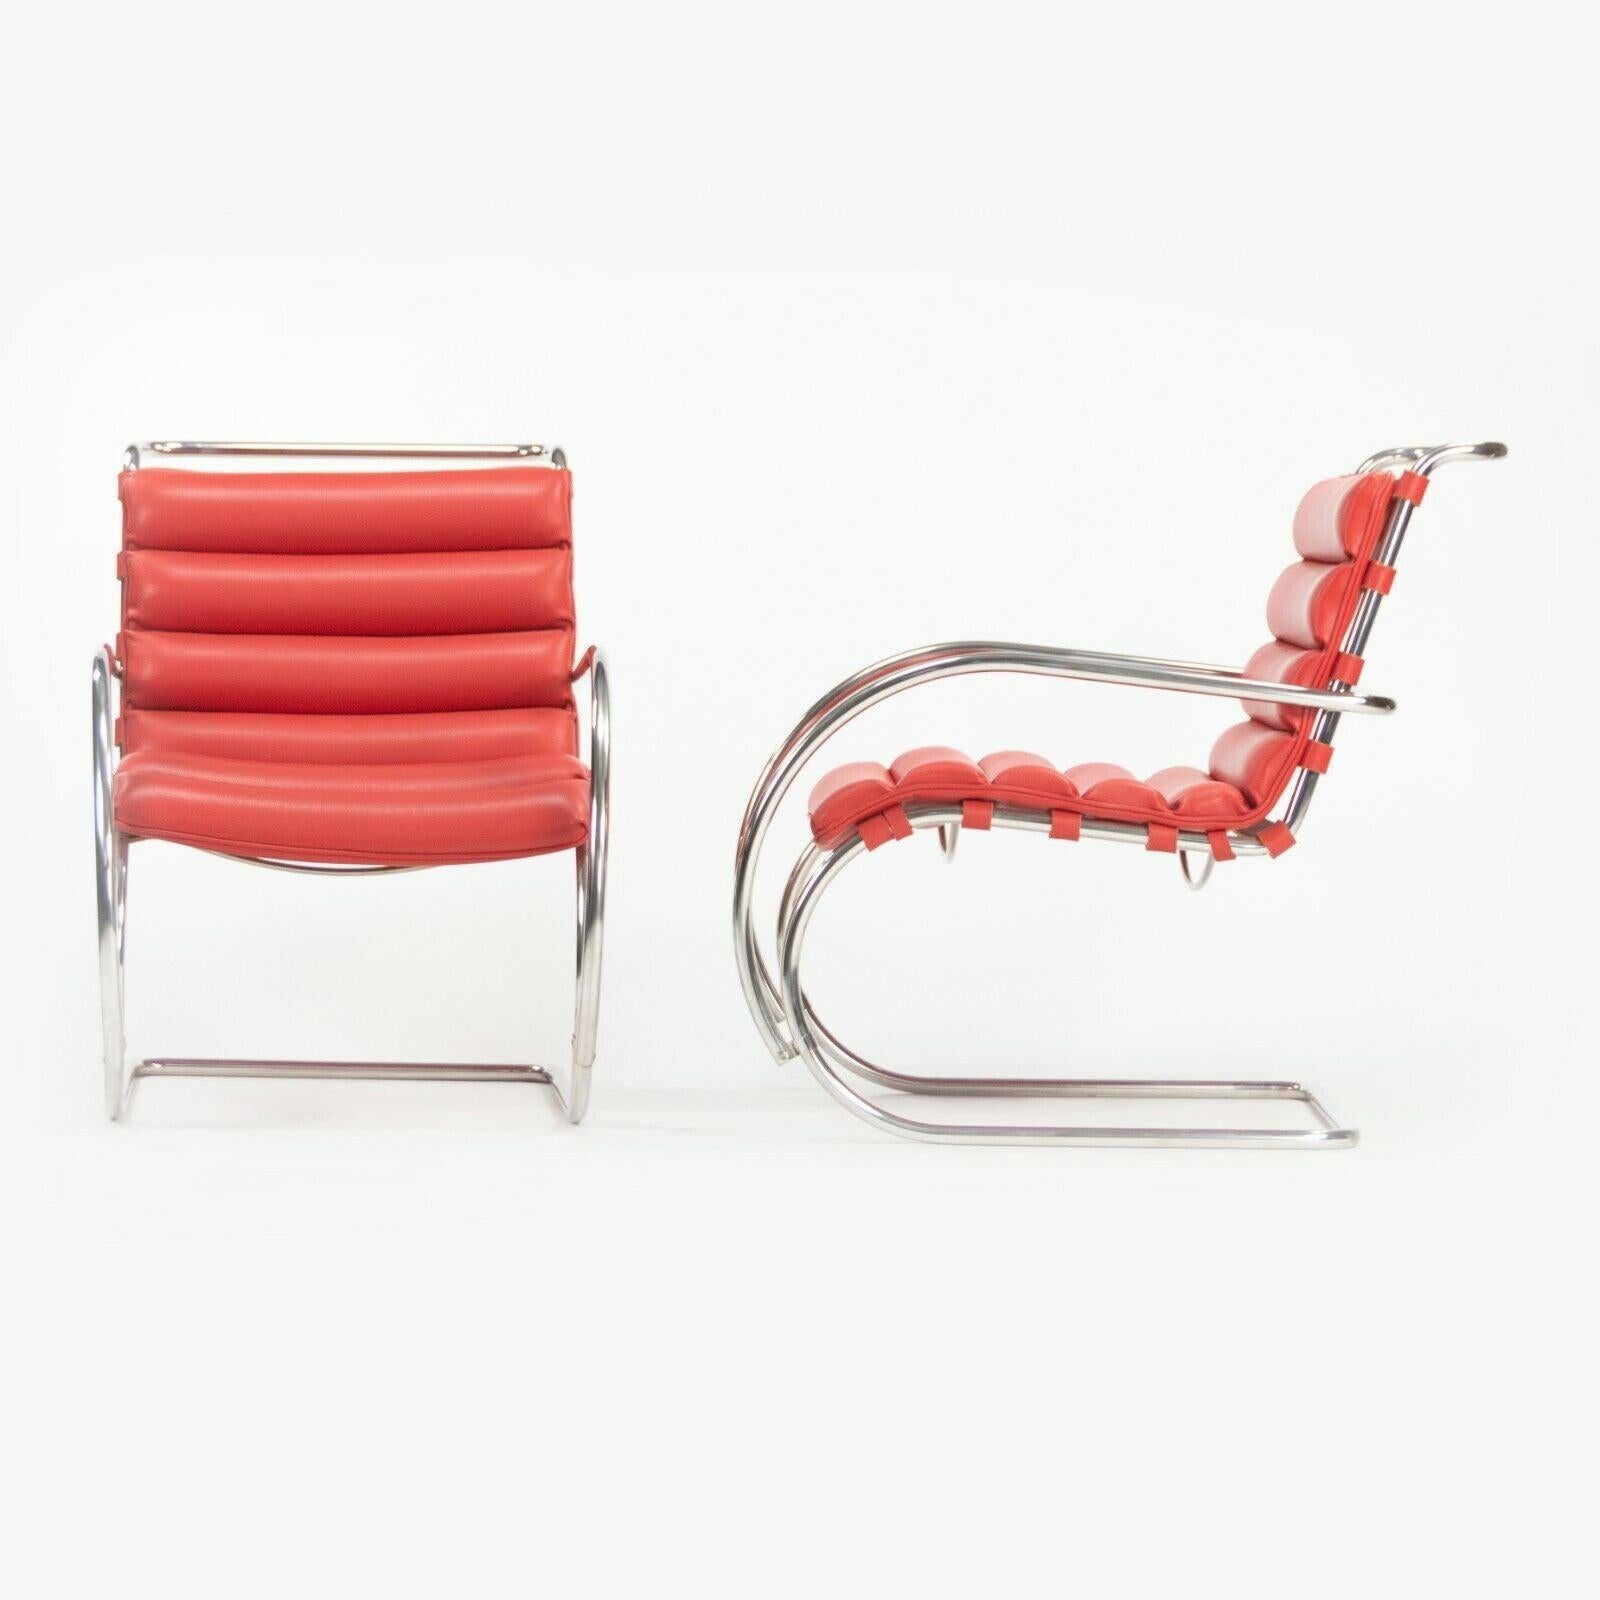 Listed for sale is a (sold separately) Mies Van Der Rohe for Knoll Studio MR arm chair in gorgeous red leather upholstery. These examples came from the executive lounge of a corporate banking headquarters in Manhattan. Condition overall is very good